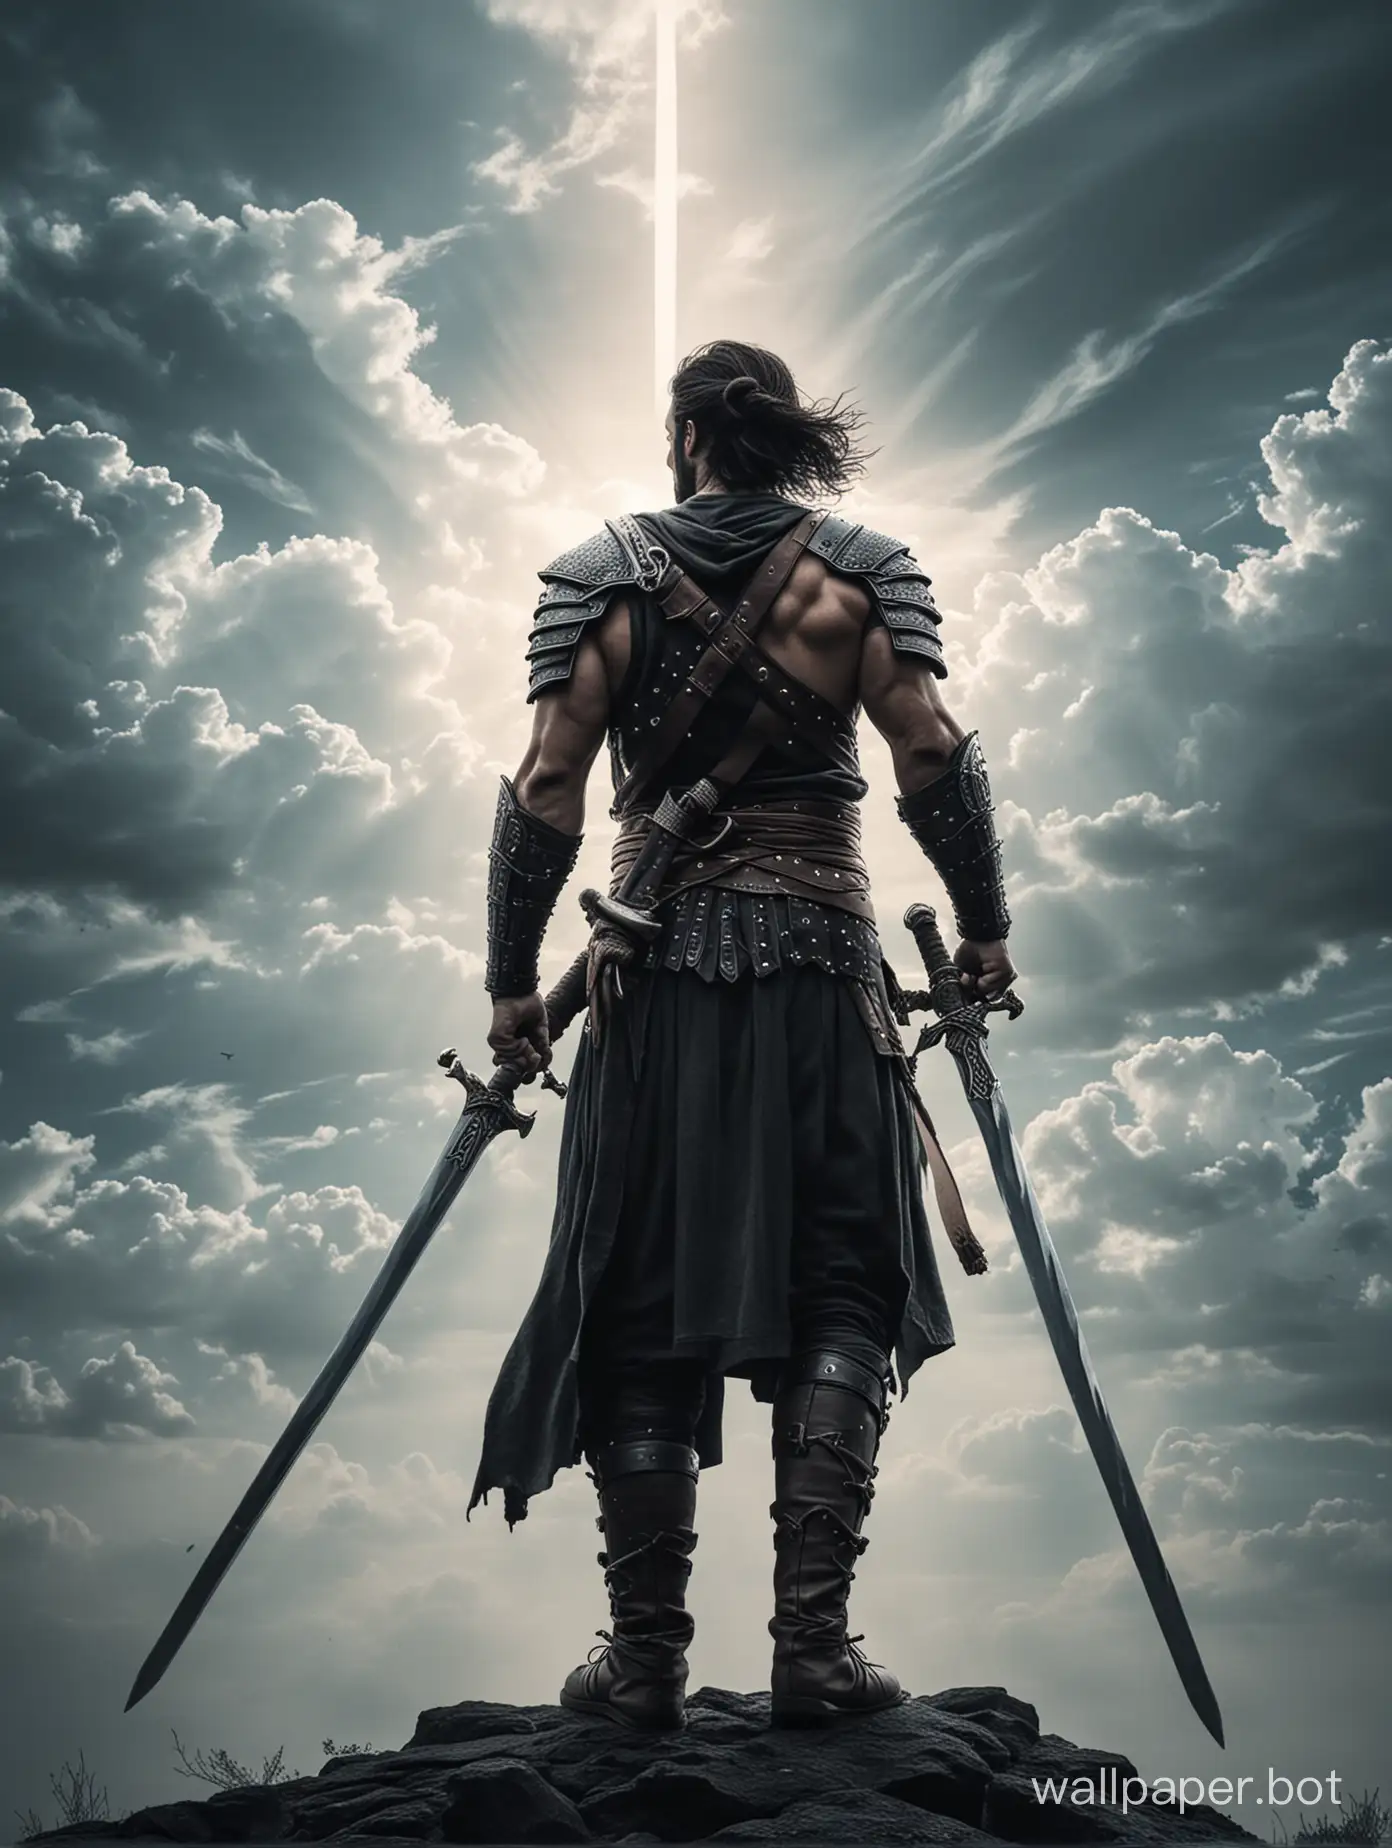 A warrior holding two swords and shouing while looking towards sky